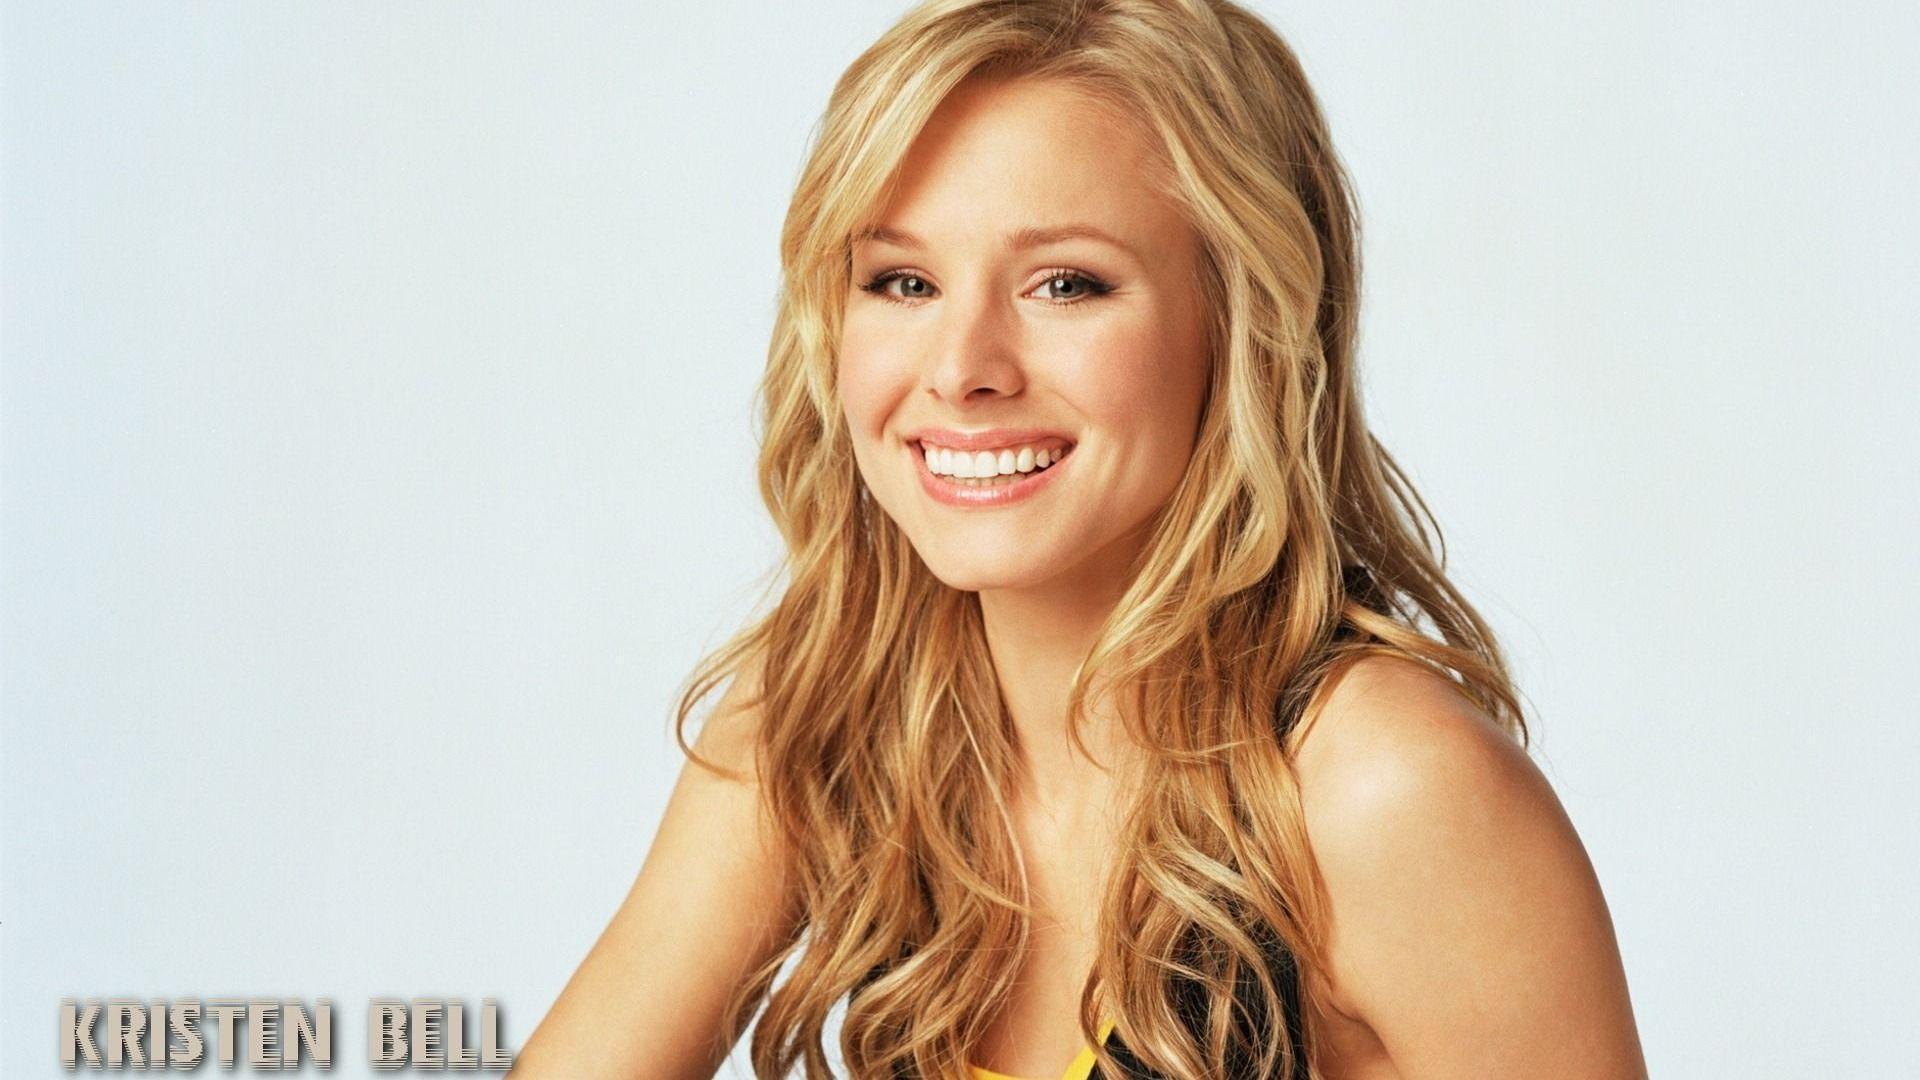 New Kristen Bell Picture Full HD Wallpaper Celebrities Picture